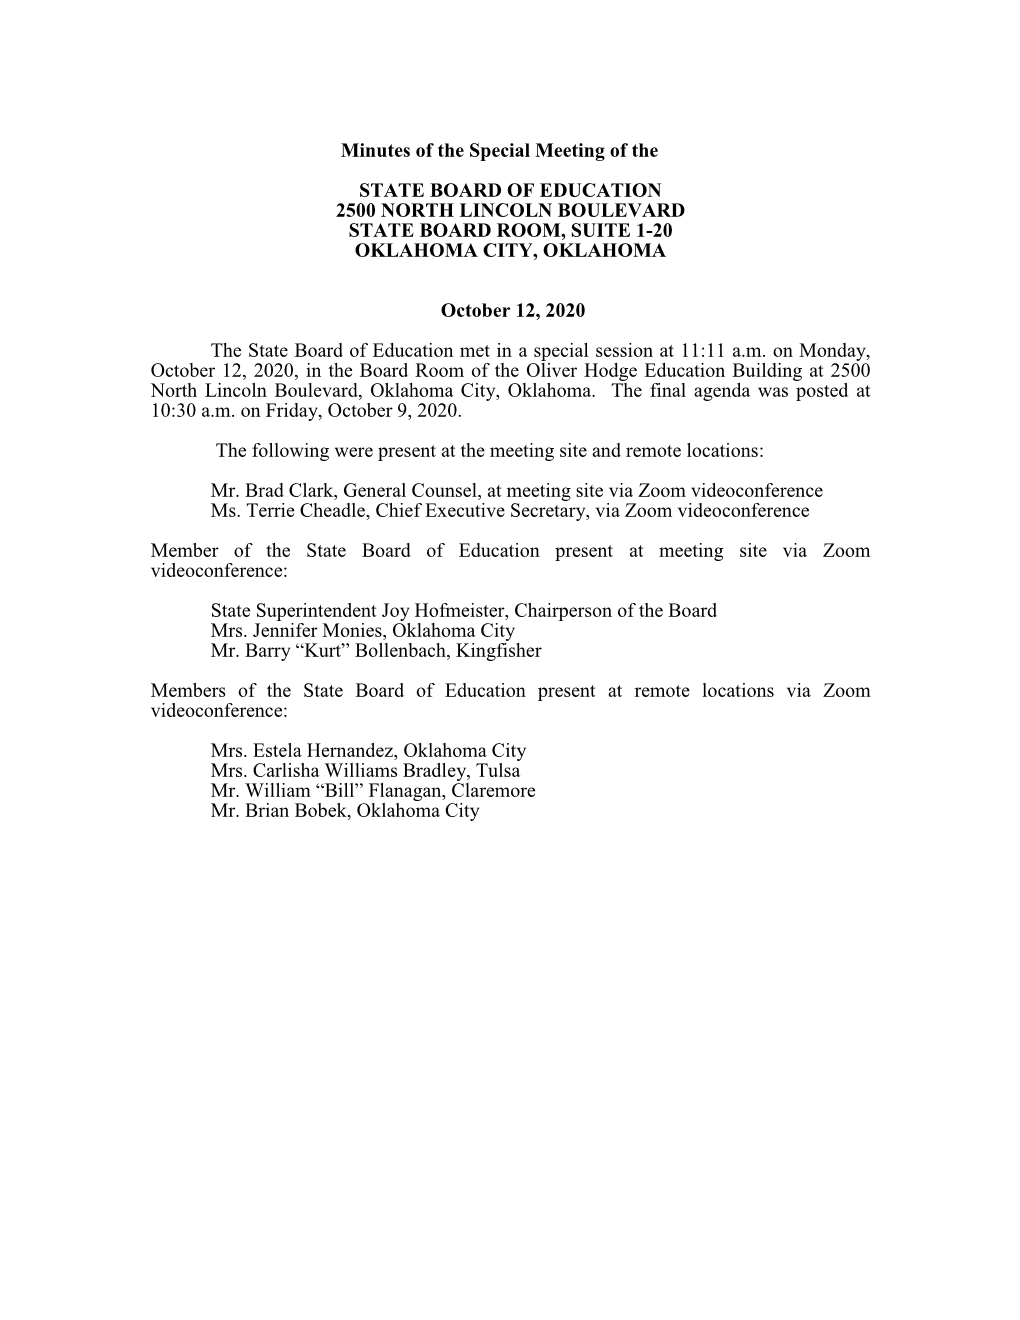 Minutes of the Special Meeting of the STATE BOARD of EDUCATION